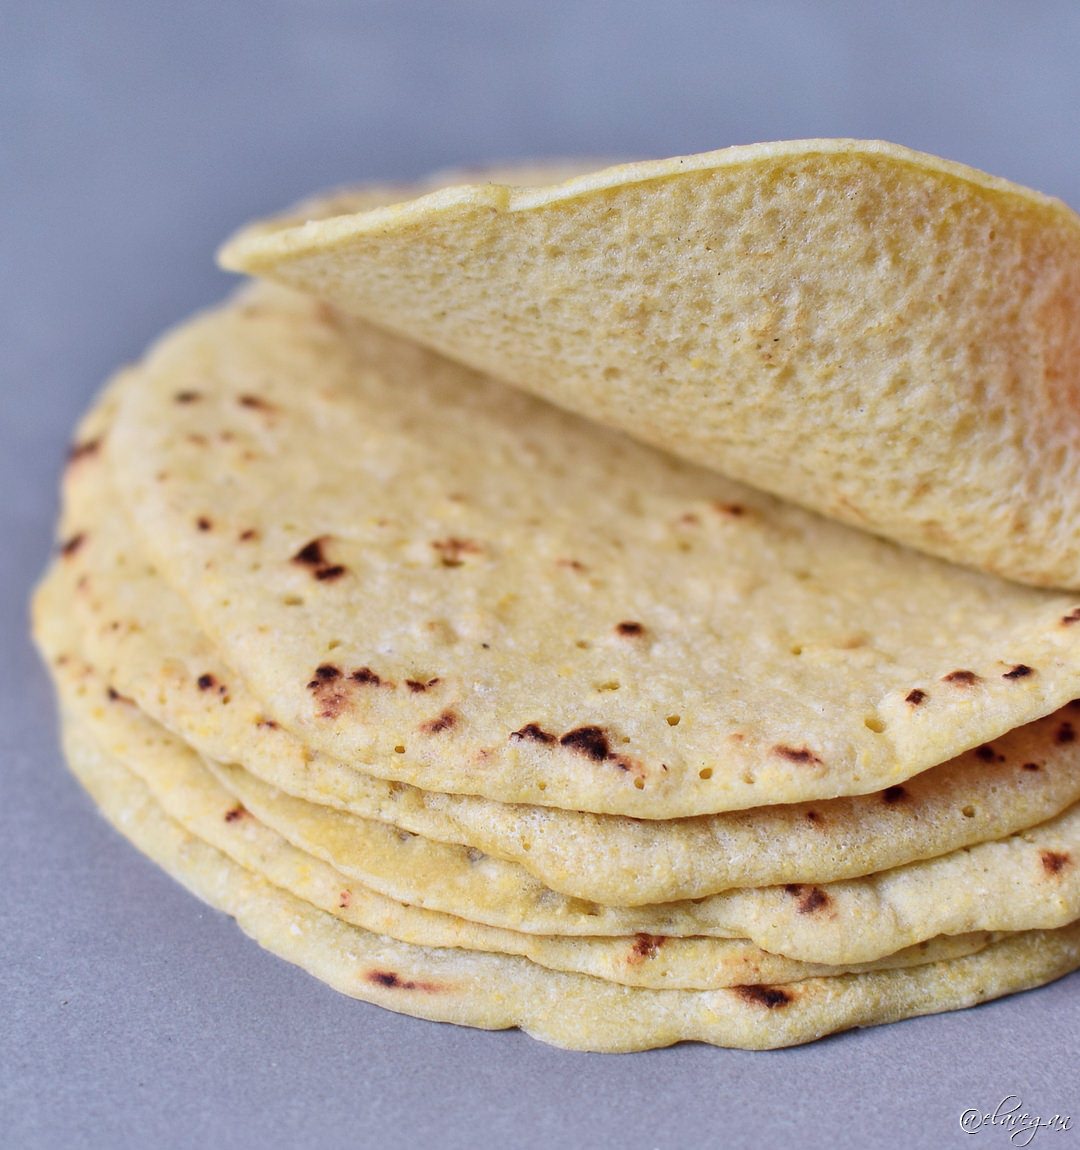 Stack of homemade tortillas with the top one lifted